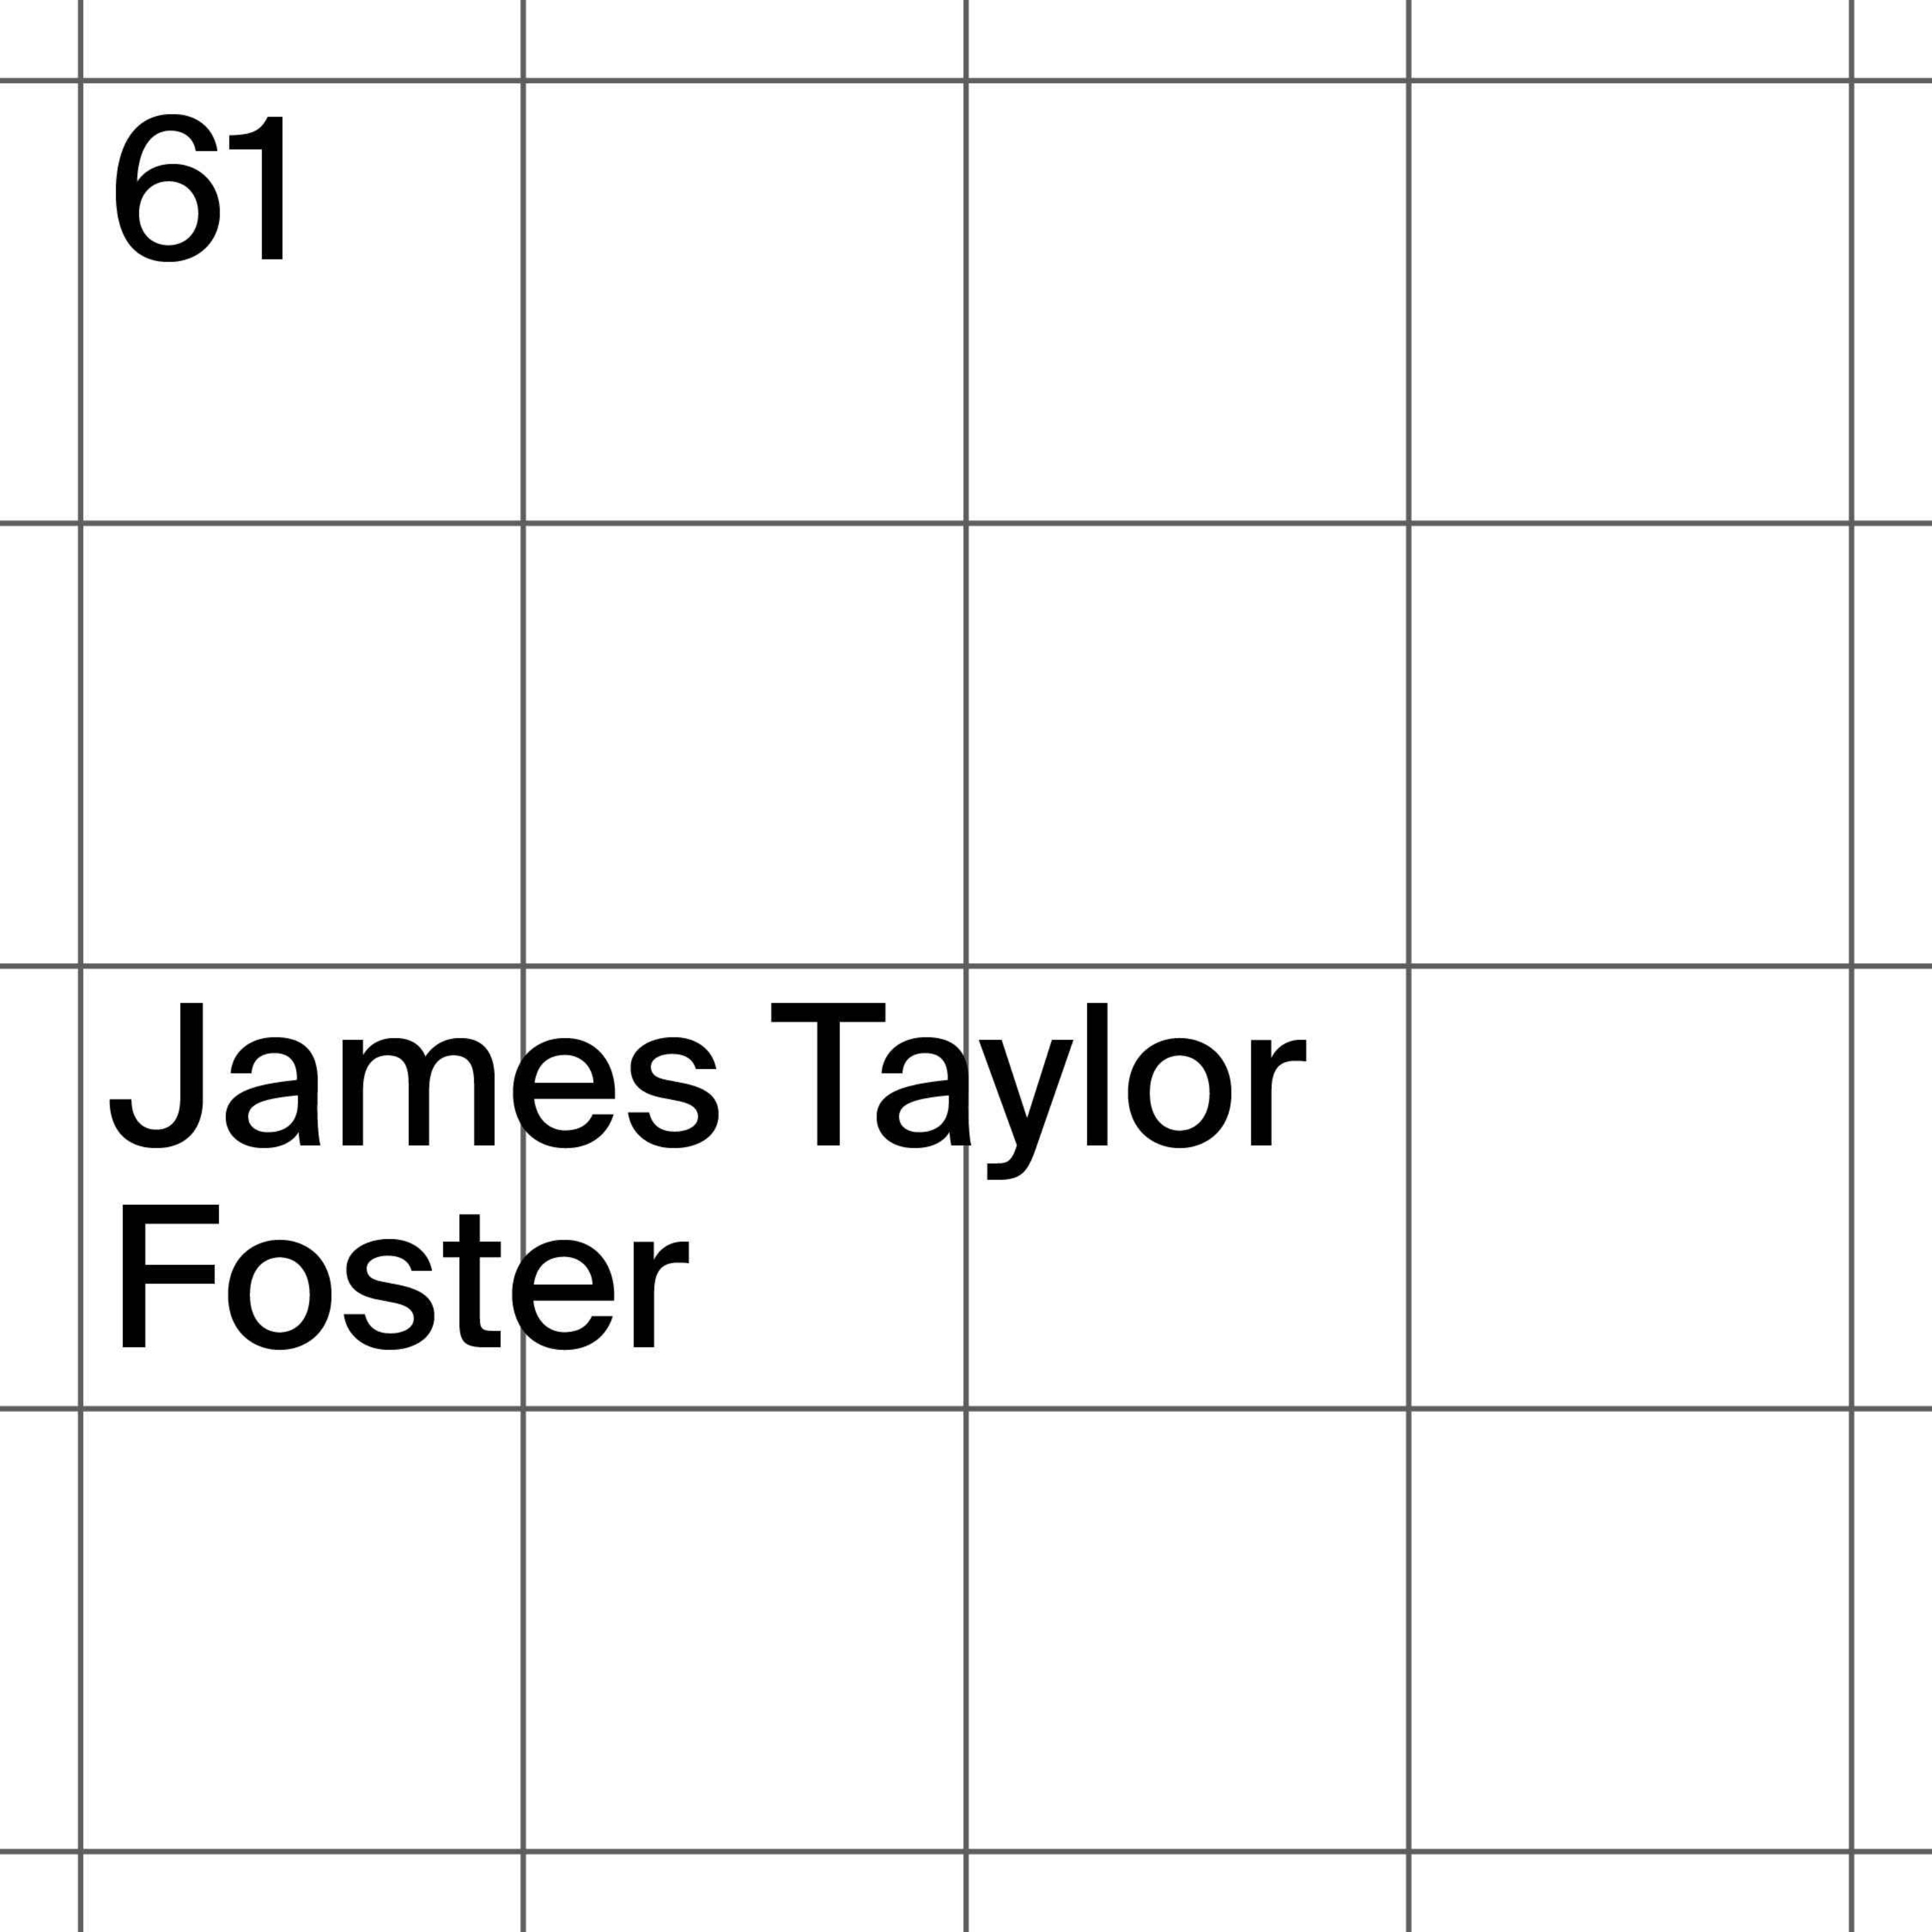 61: James Taylor Foster